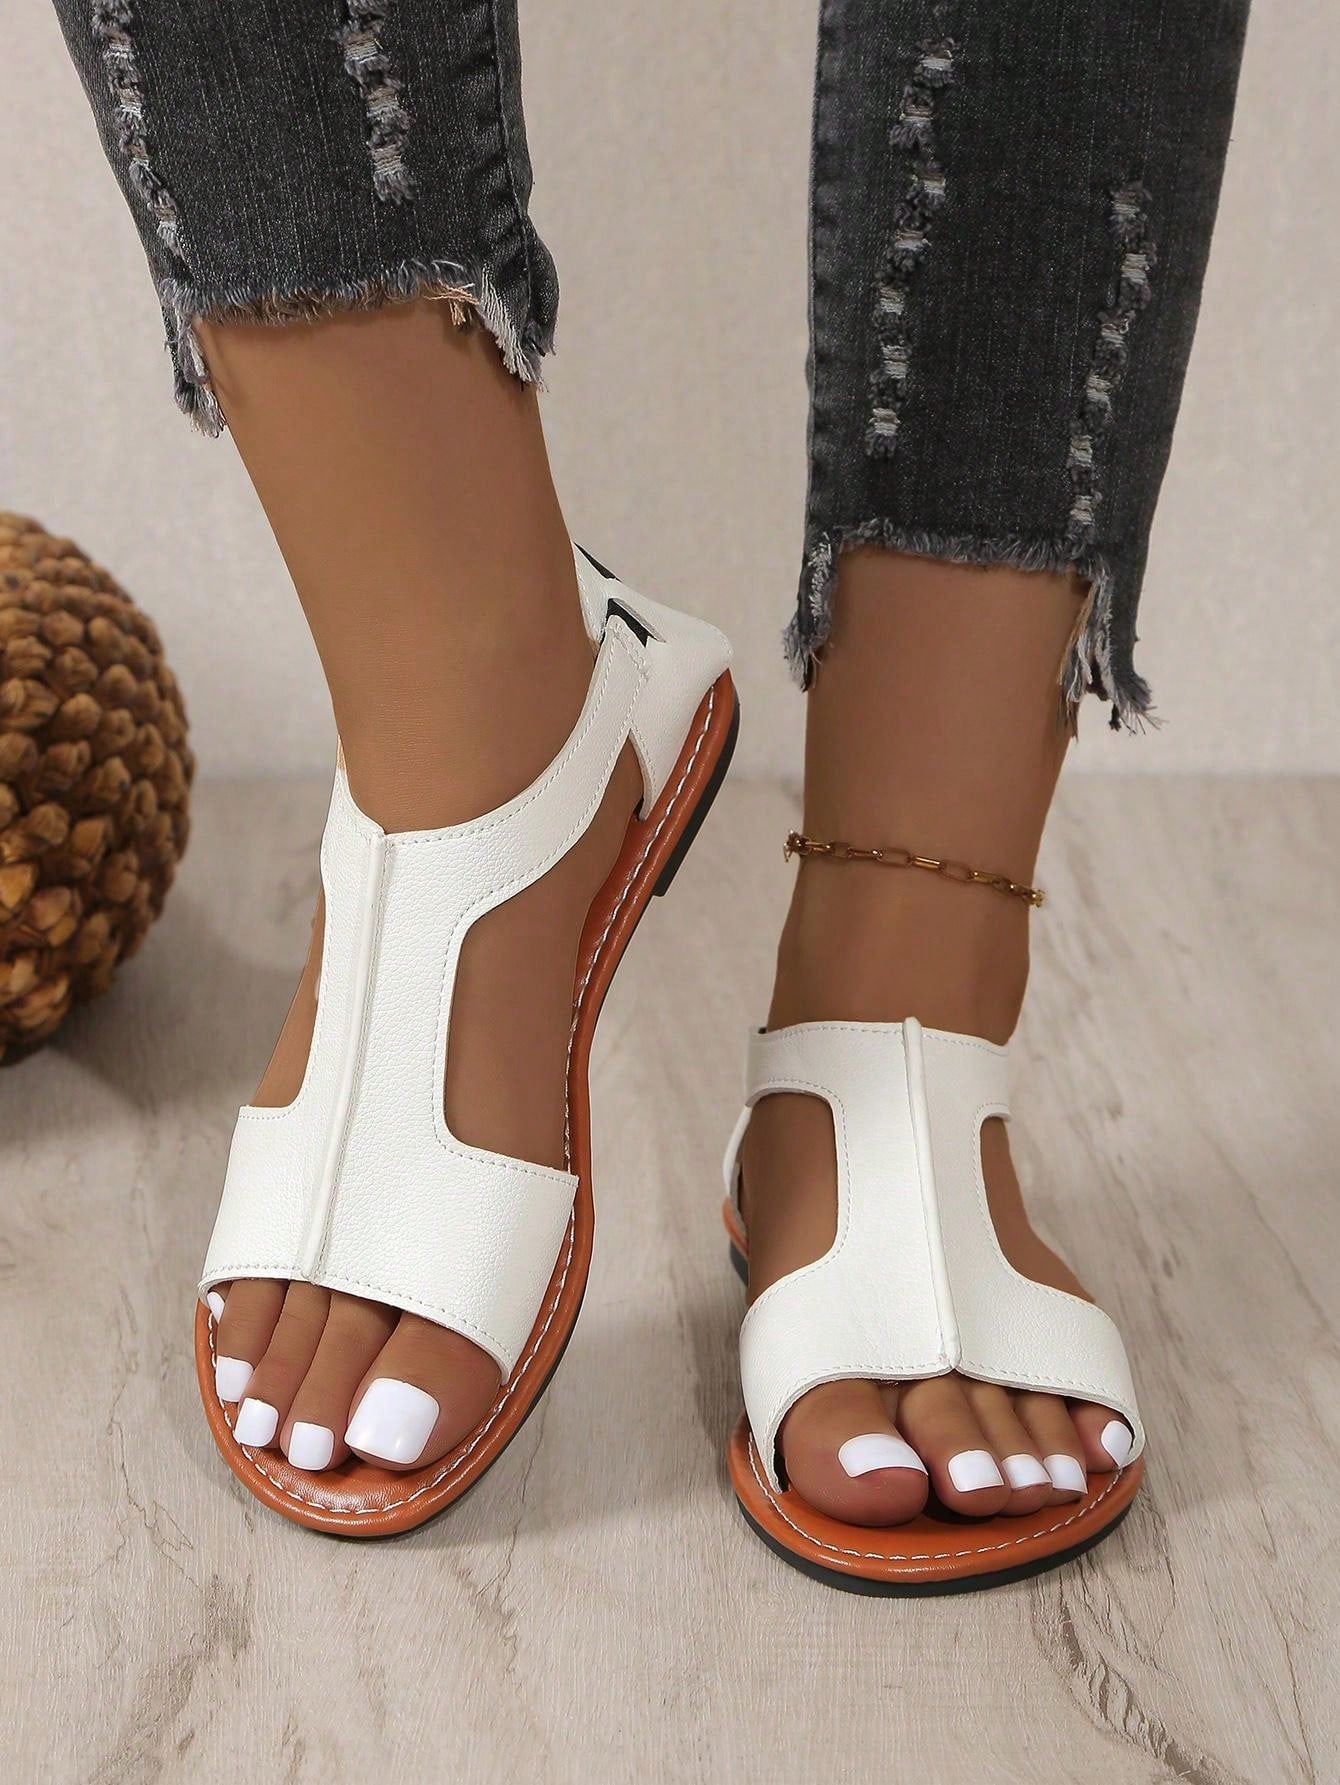 New Women Casual Comfortable Slip-On Flat Sandals With College Style Made Of Leather, Ideal For Beach Party And Music Festival-White-10